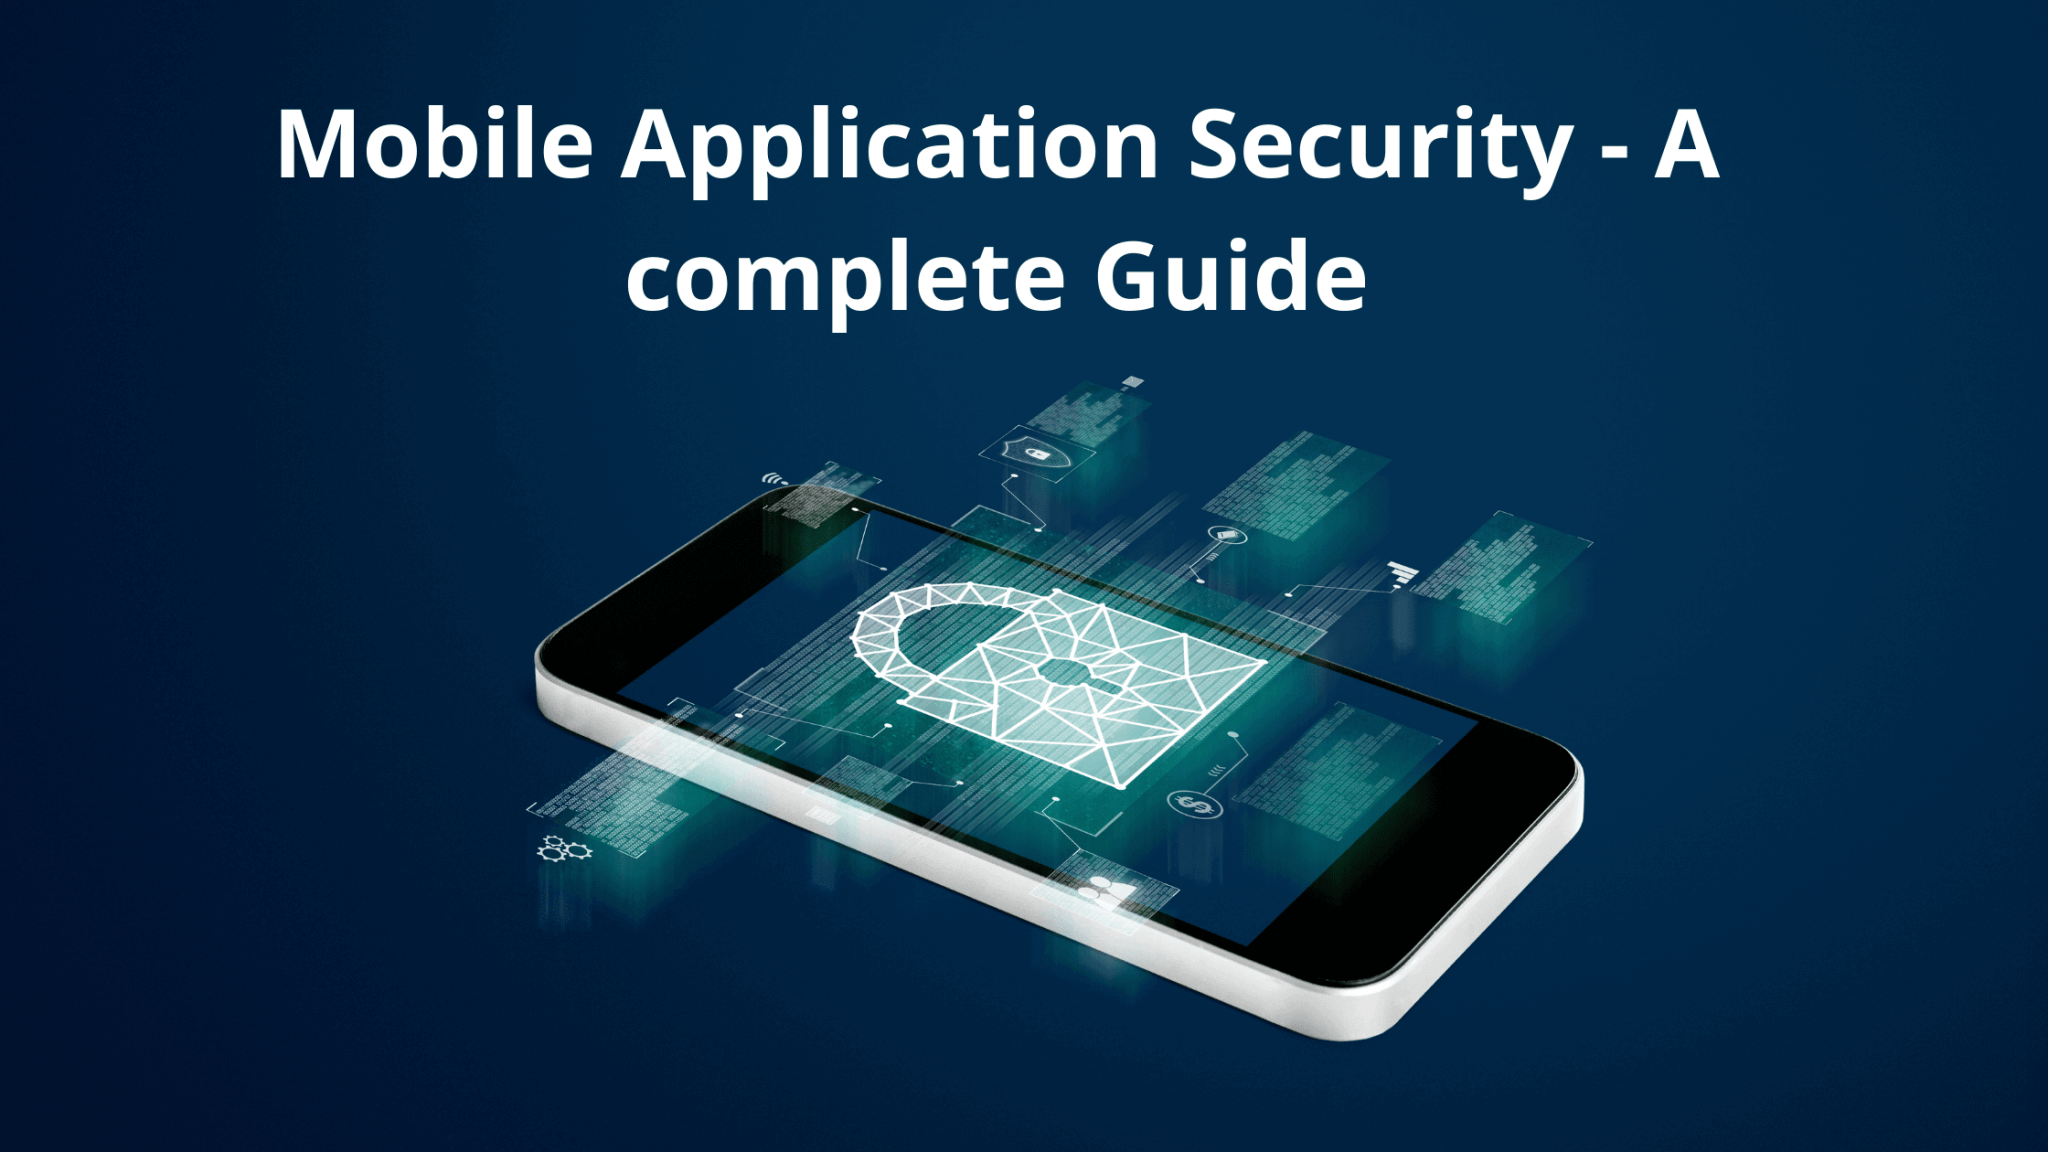 Mobile application security